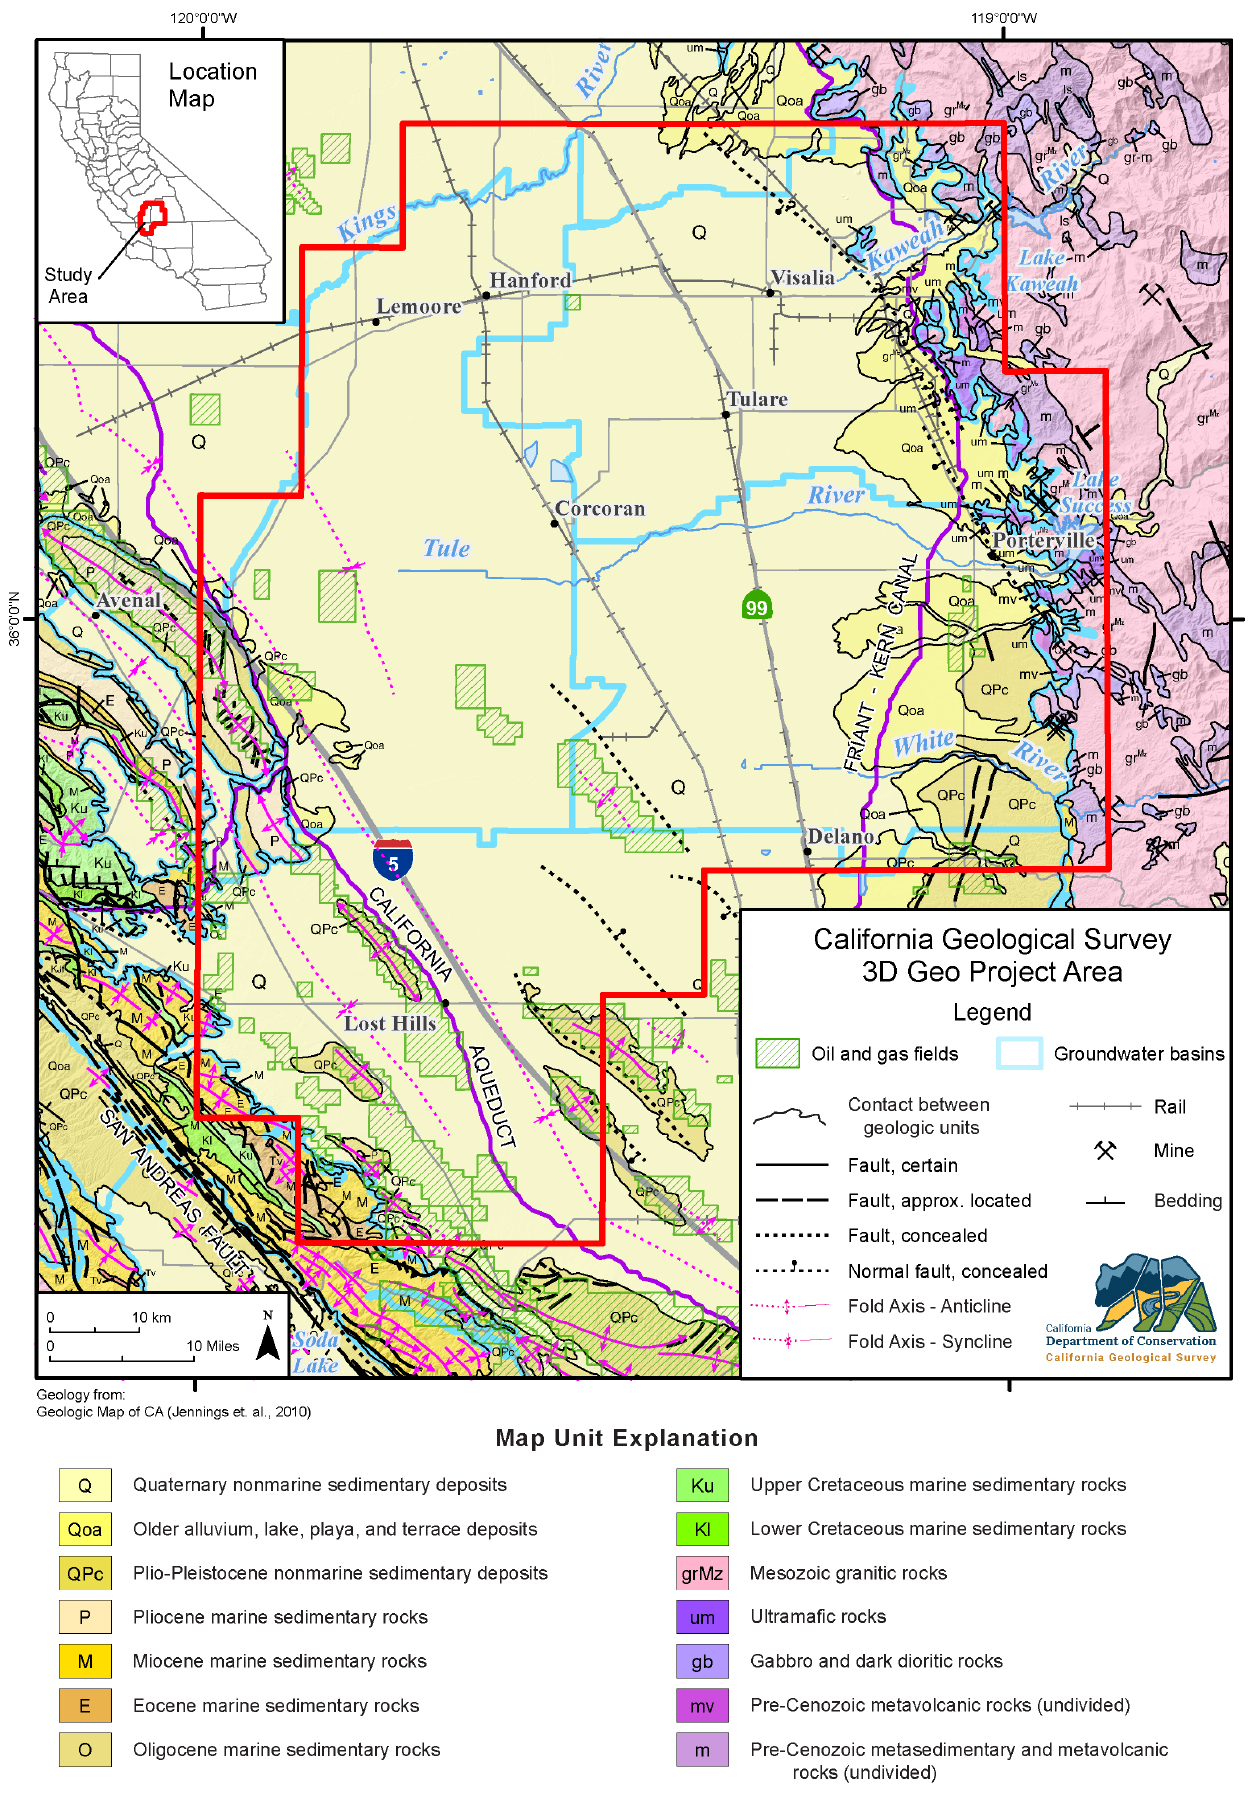 Geologic map of the project area.